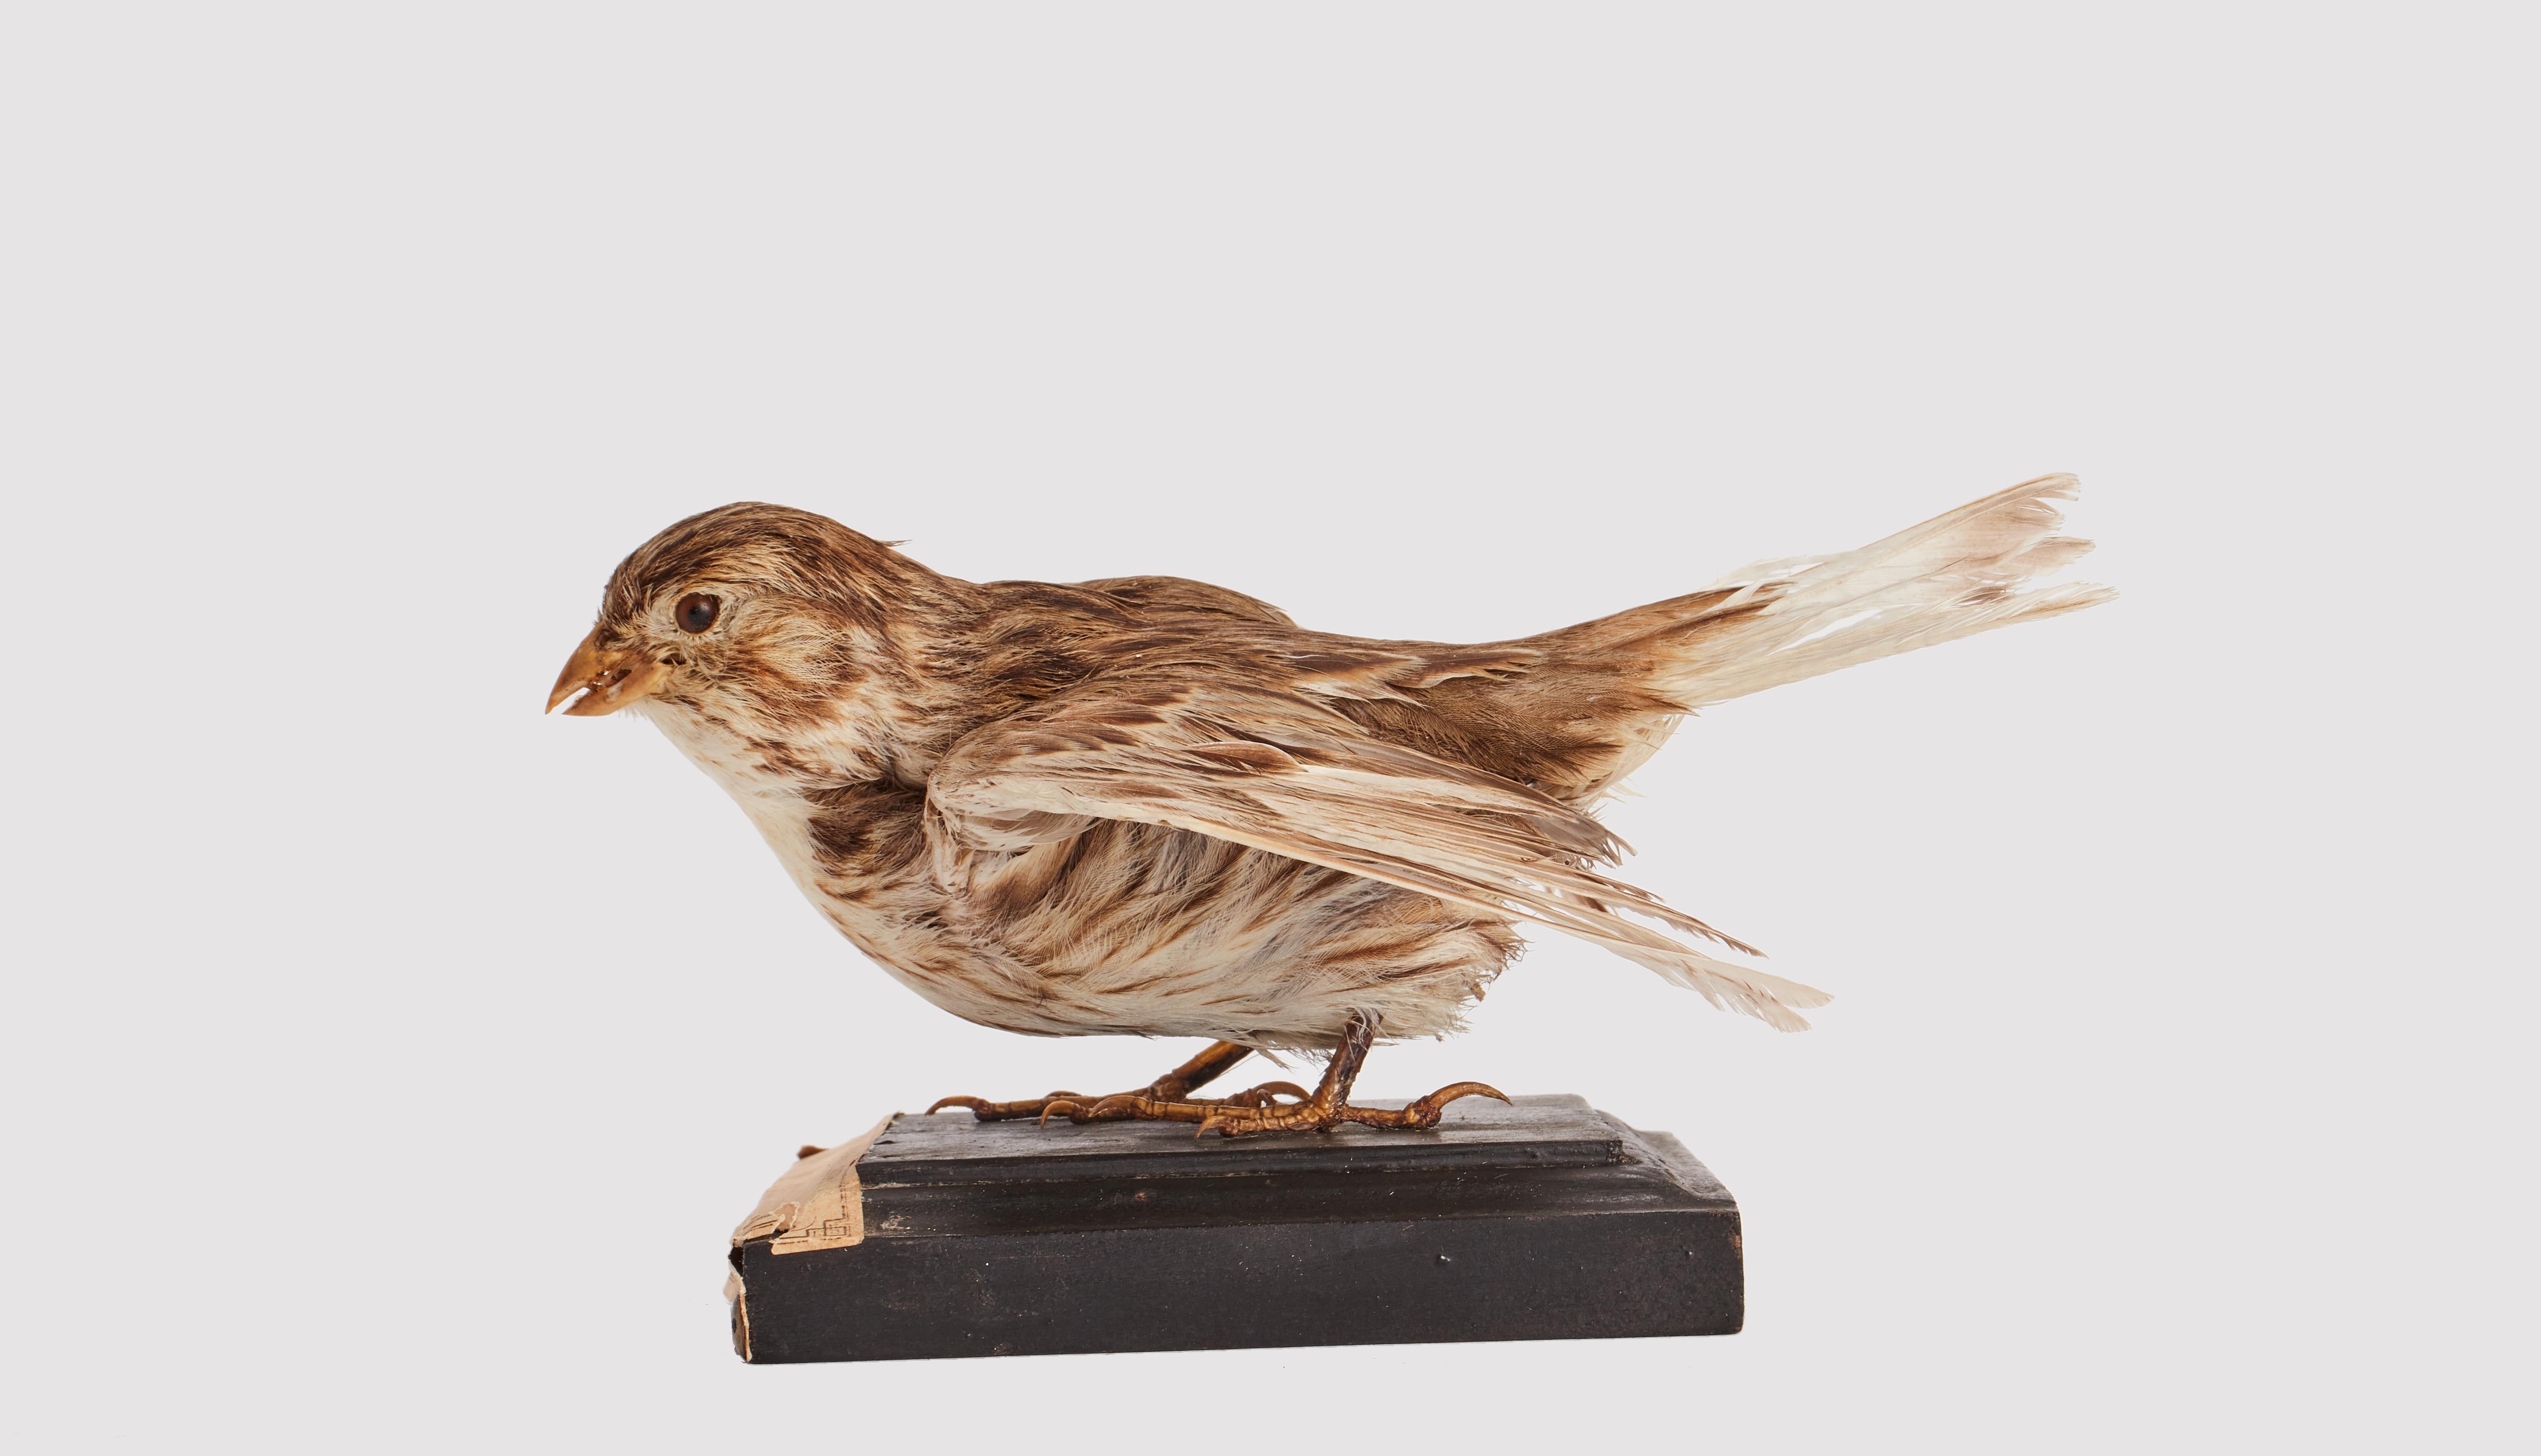 Natural specimen from Wunderkammer Stuffed bird Corn Bunting (Emberiza Calandra) mounted on a wooden base with cartouche Specimen for laboratory and Natural history cabinet. S. Brogi Naturalista. Siena, Italy 1880 ca.